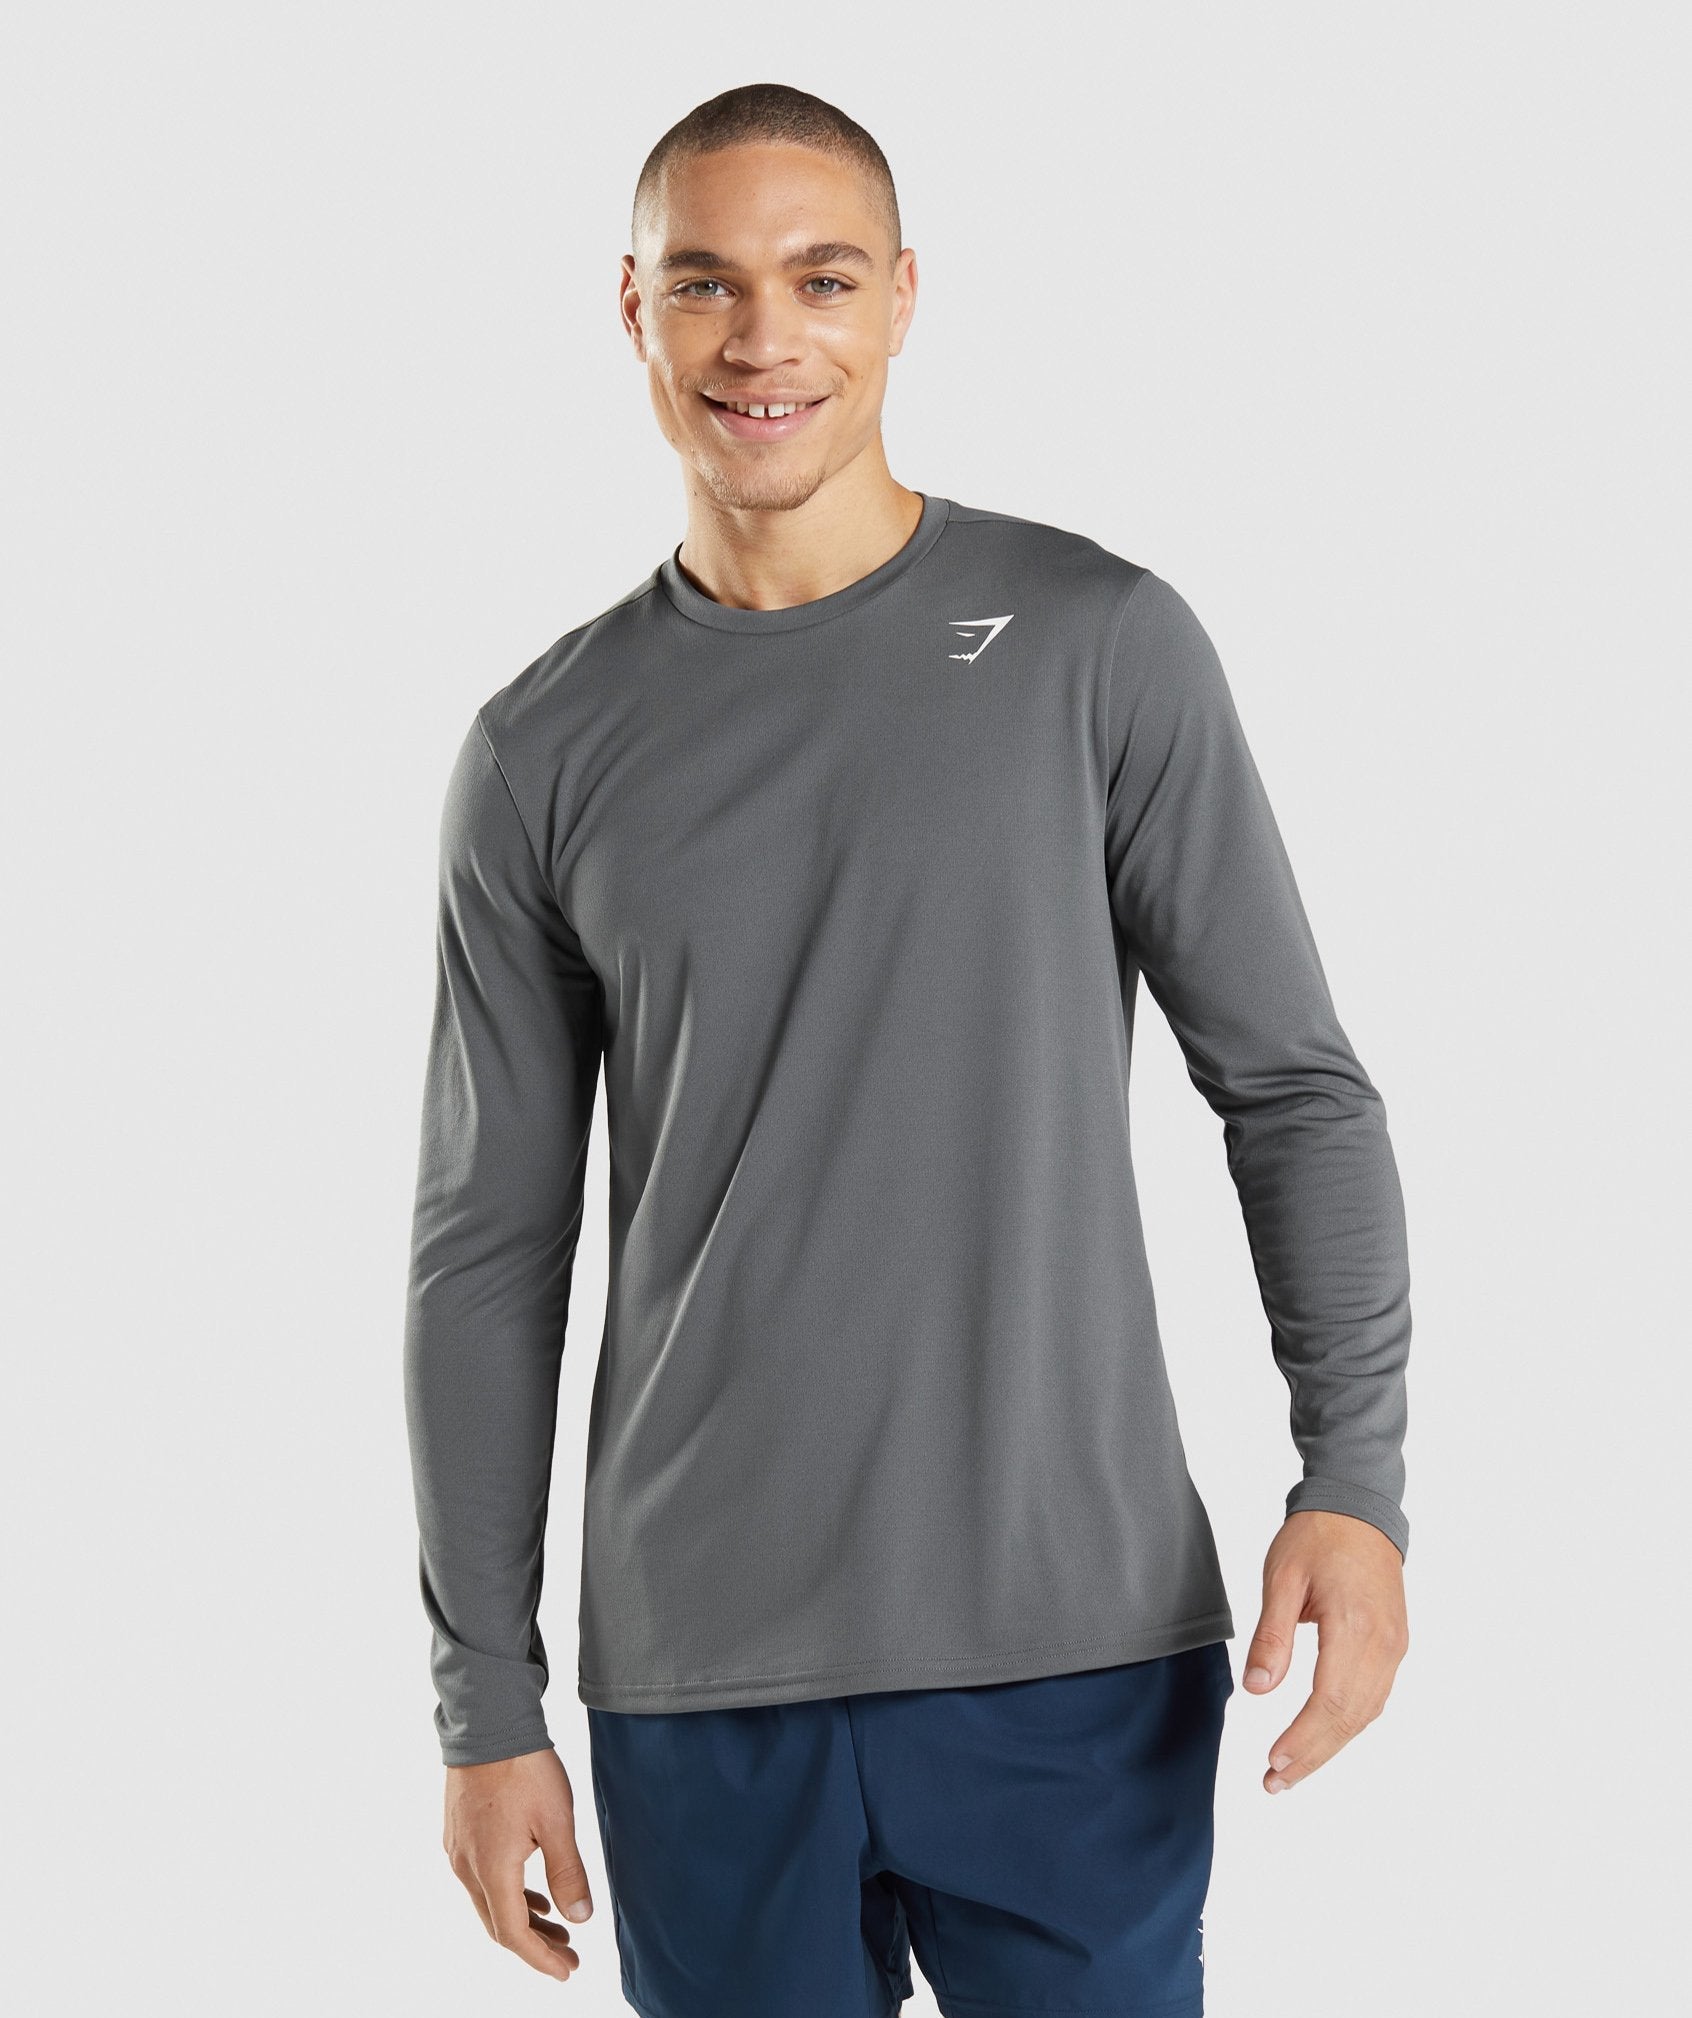 Arrival Long Sleeve T-Shirt in Charcoal - view 1